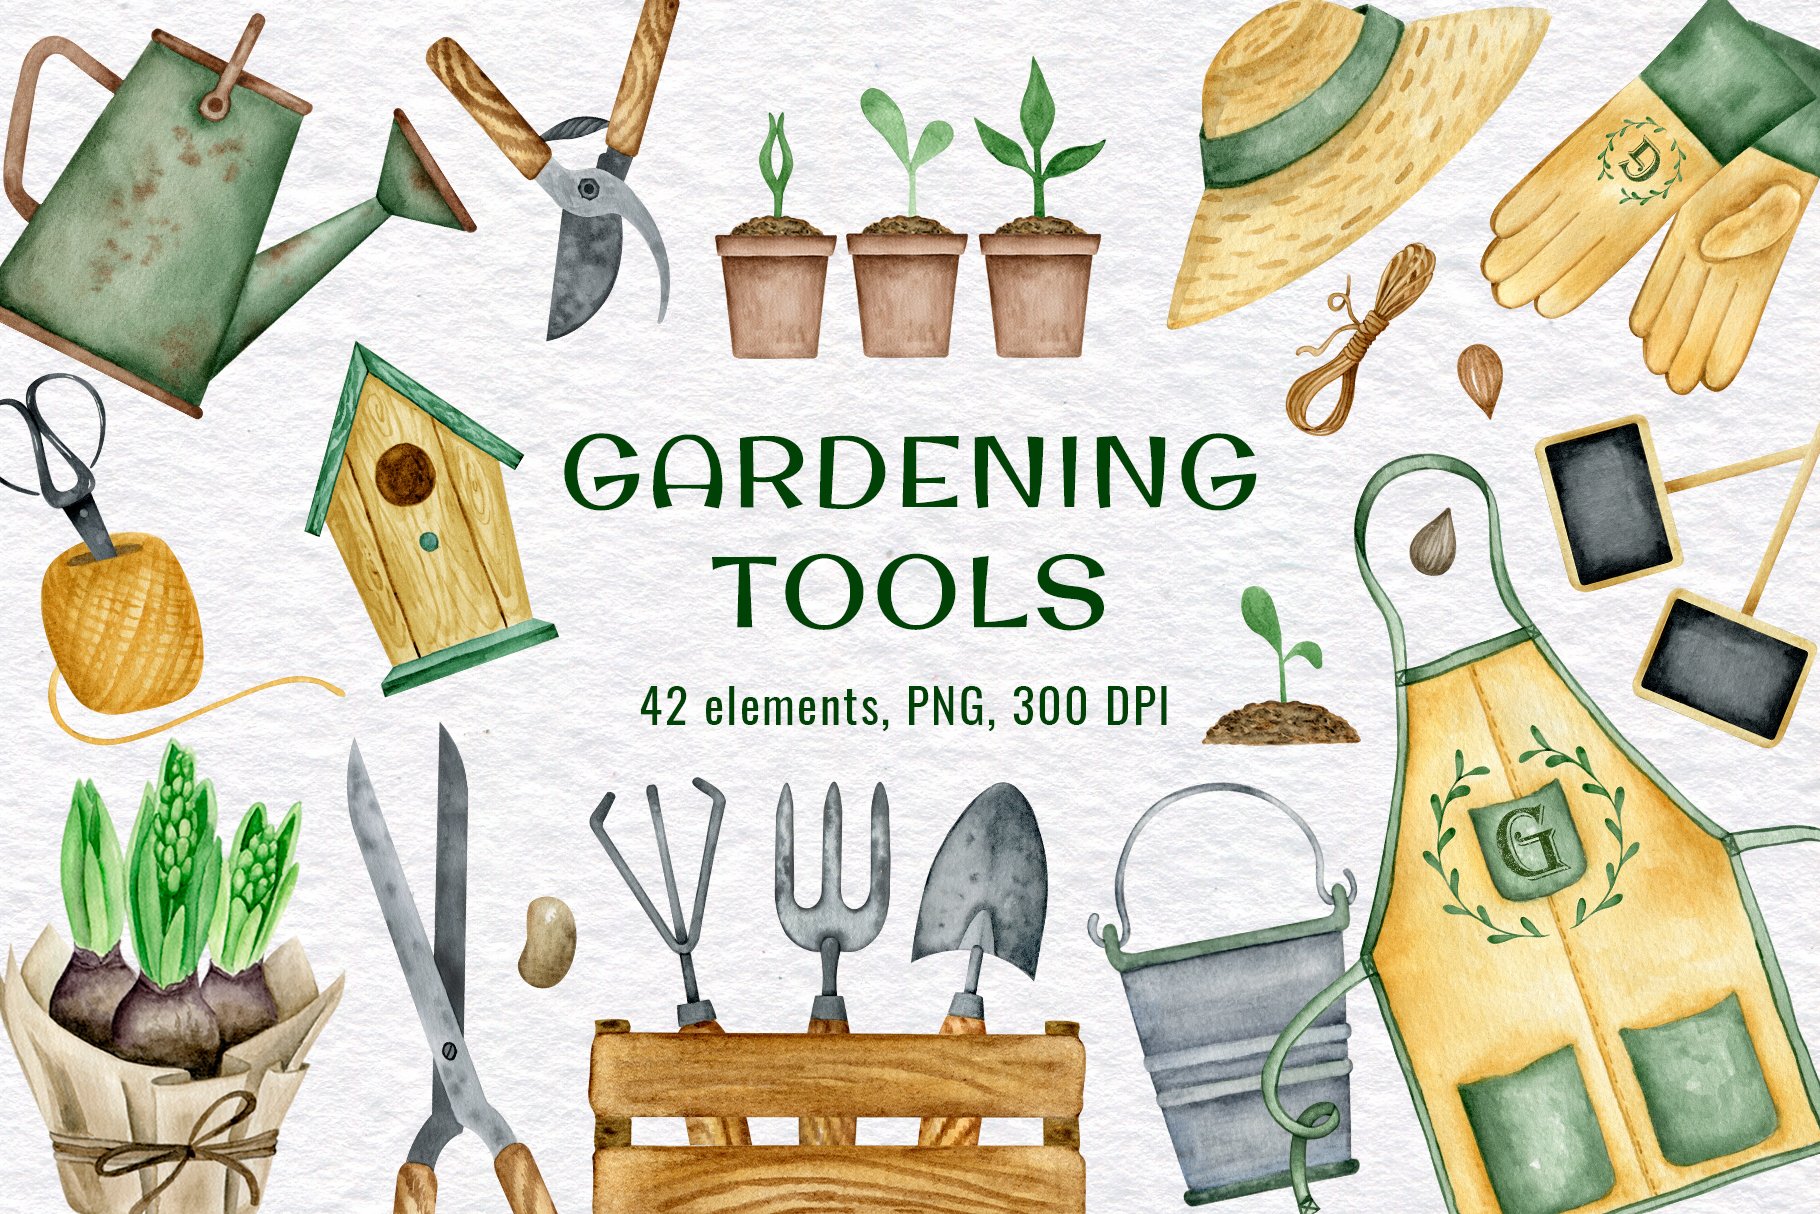 Vintage watercolor gardening tools cover image.